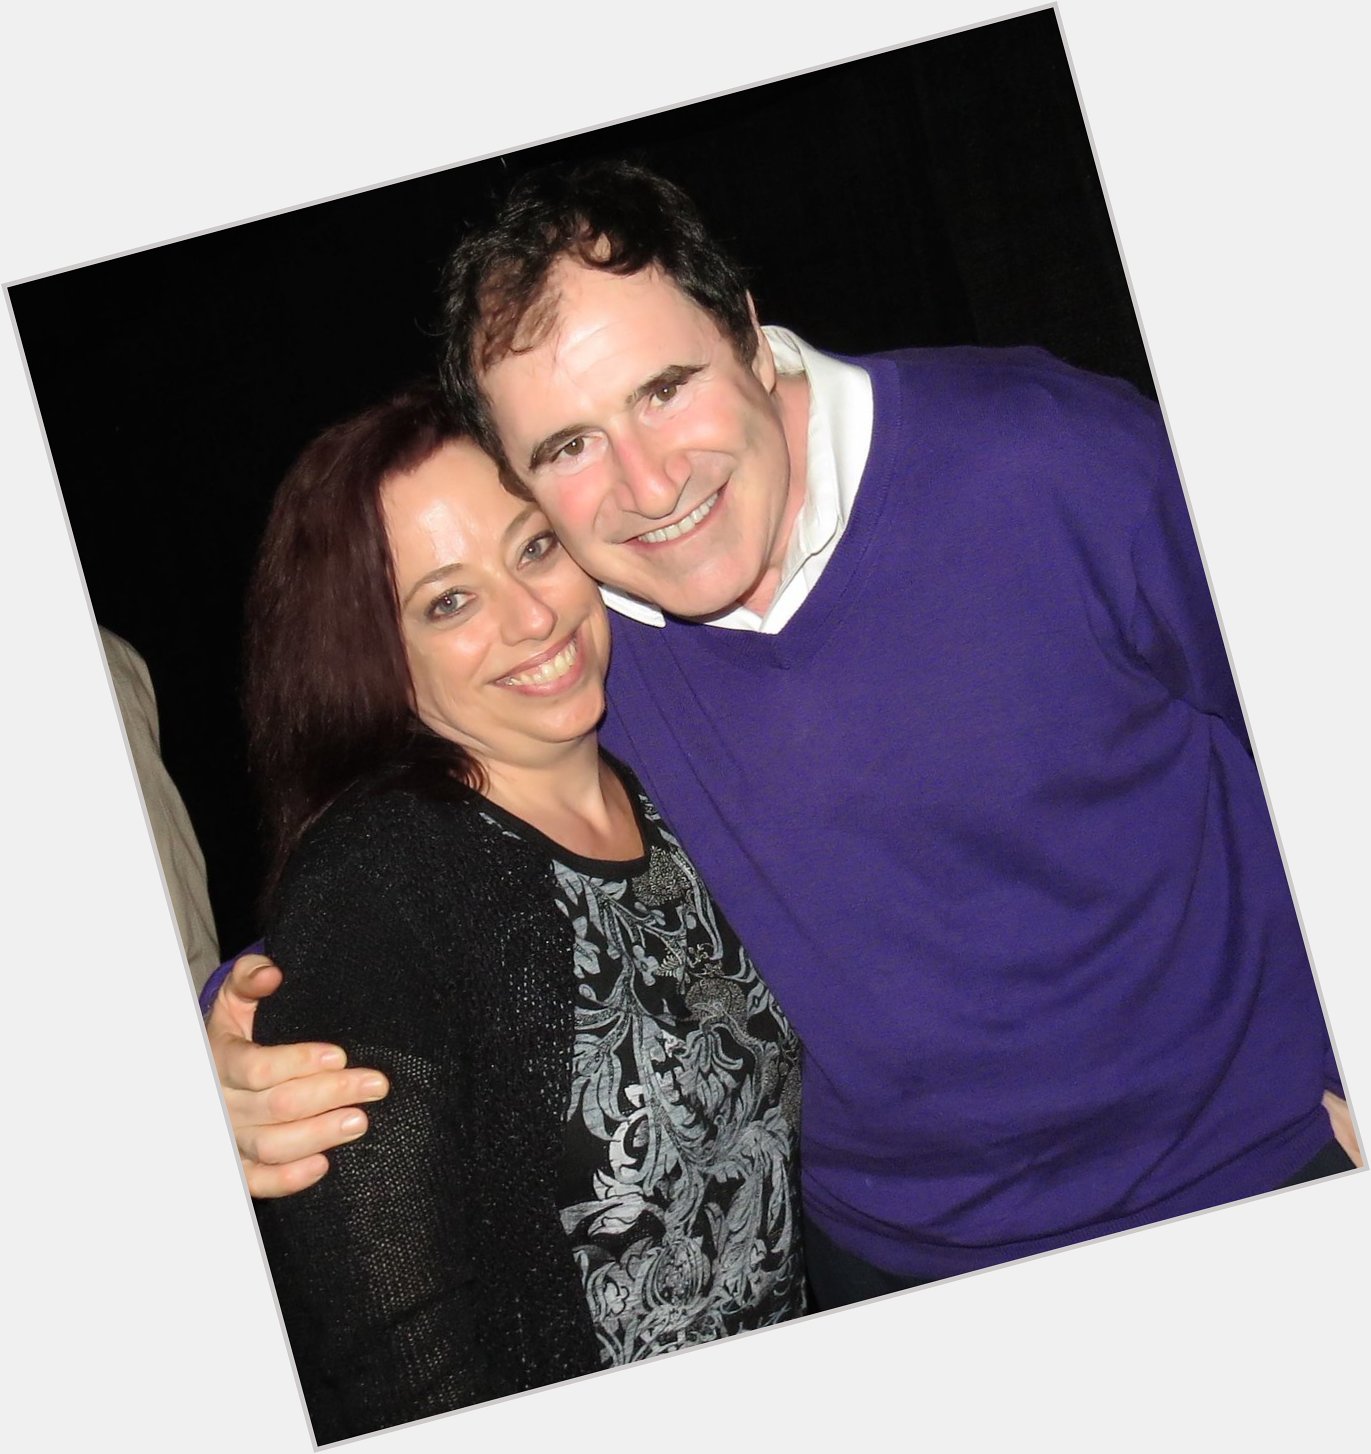 Happy birthday to Richard Kind today! He was such a sweet guy and I loved being able to meet him. 